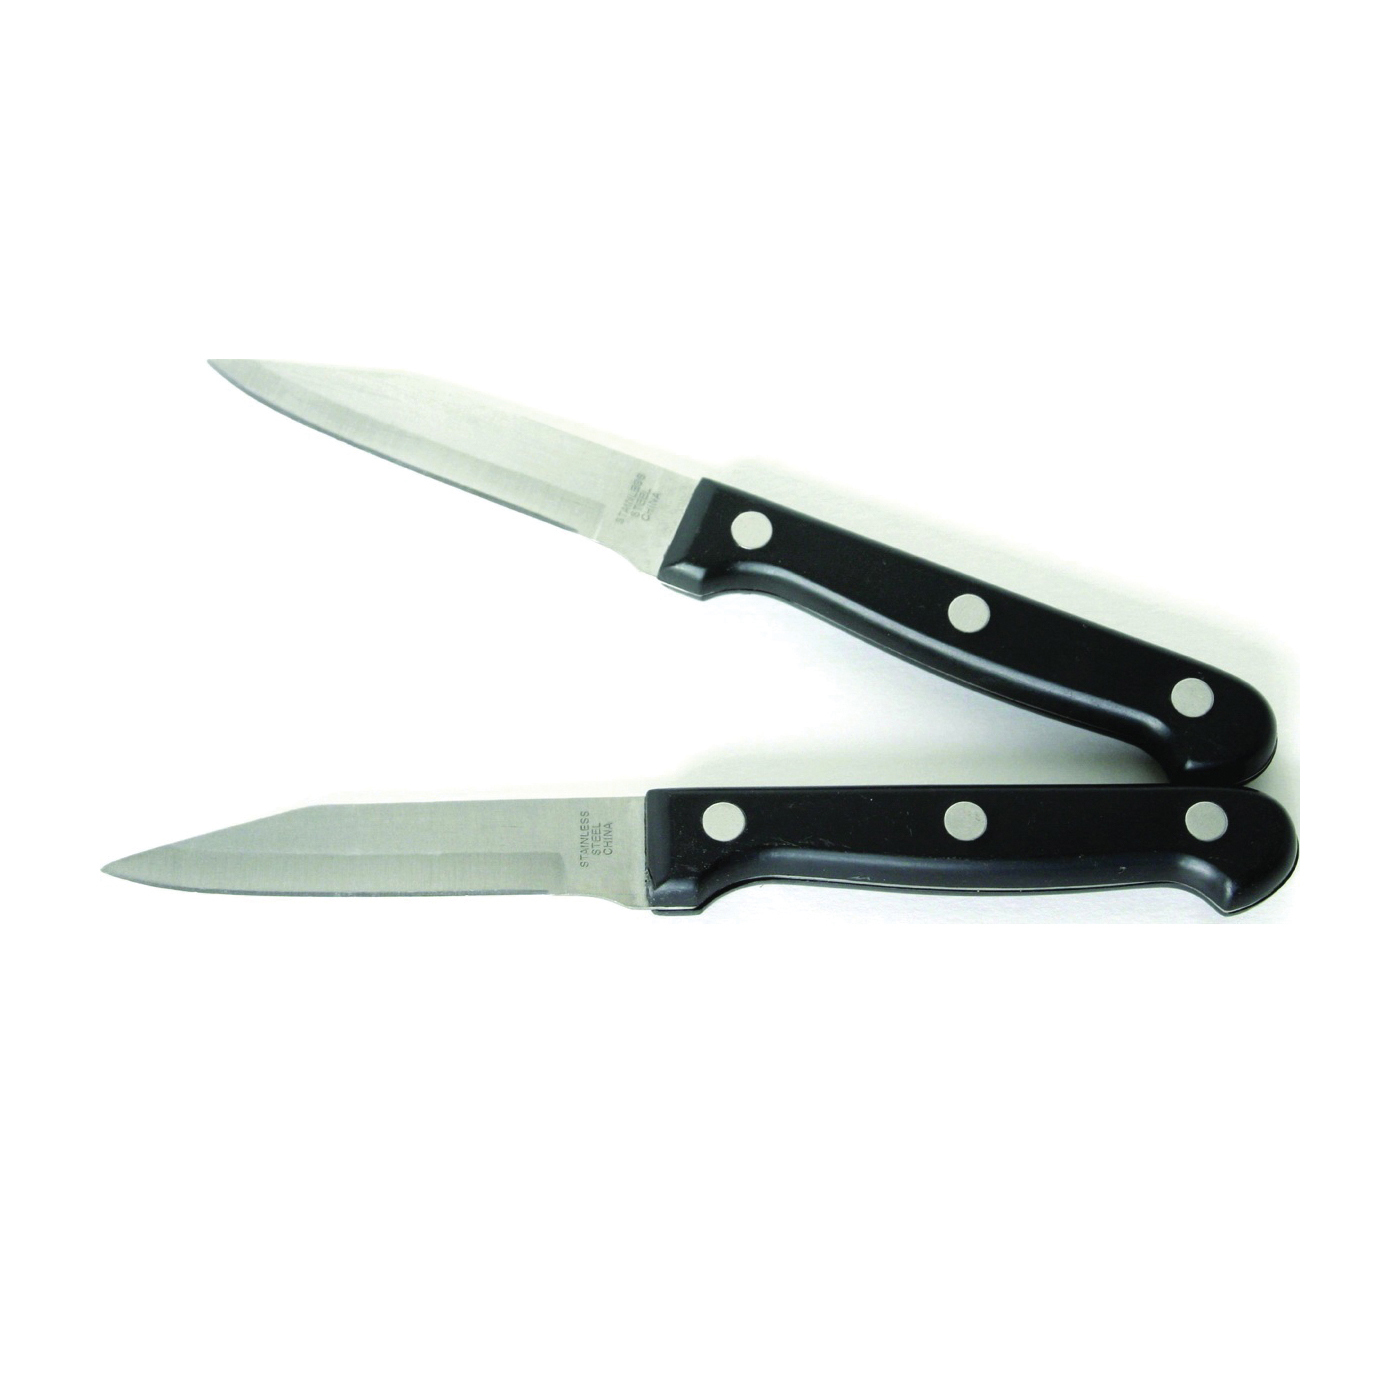 Chef Craft 21131 Paring Knife Set, Stainless Steel Blade, ABS Handle